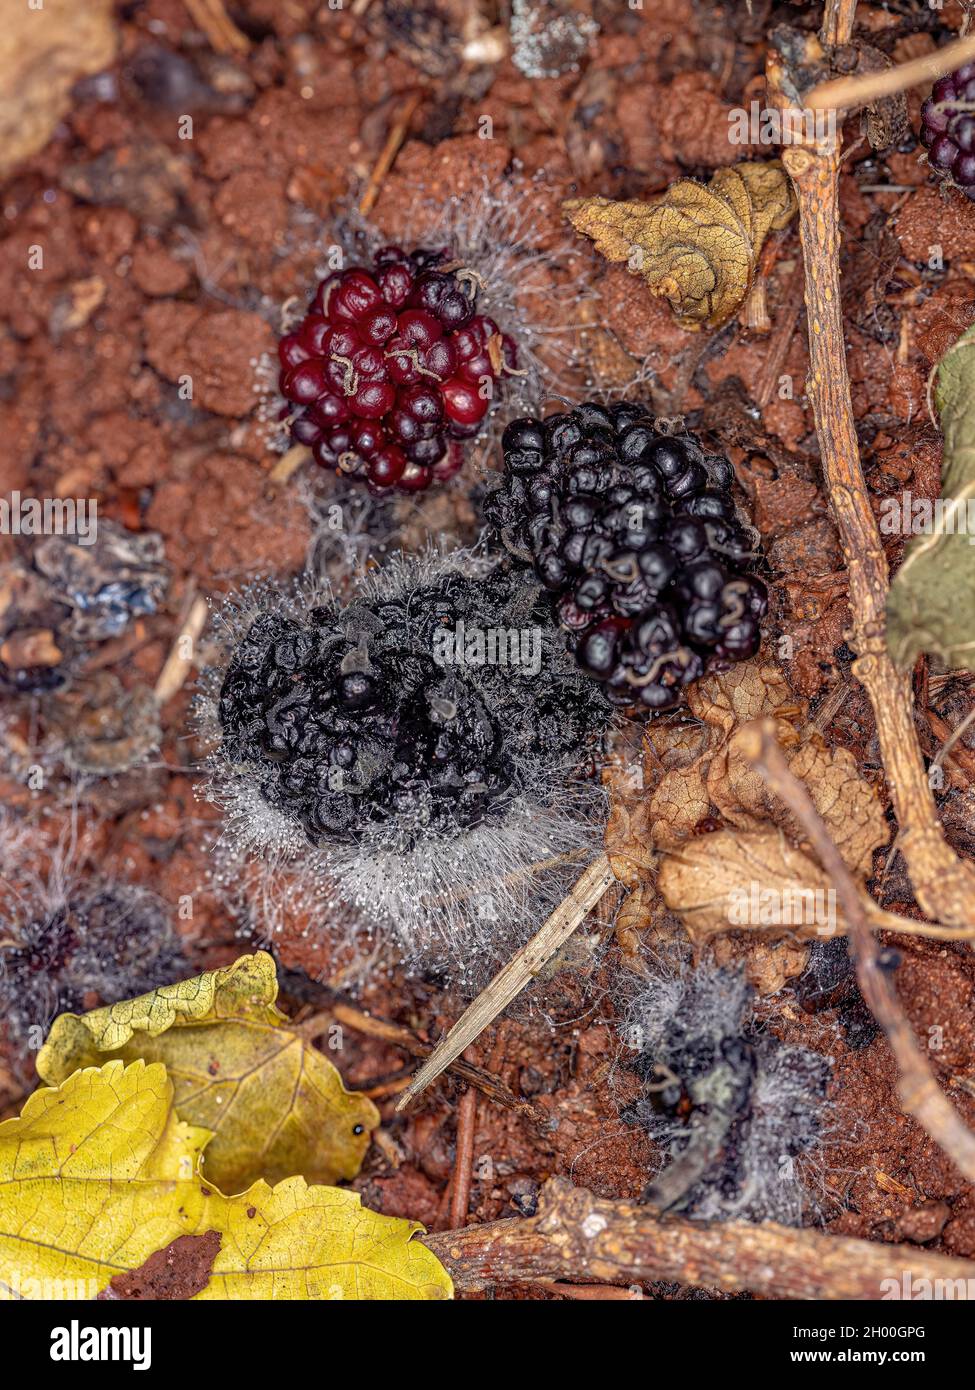 Ripe mulberry fruits fallen on the ground in a state of fungal decomposition Stock Photo